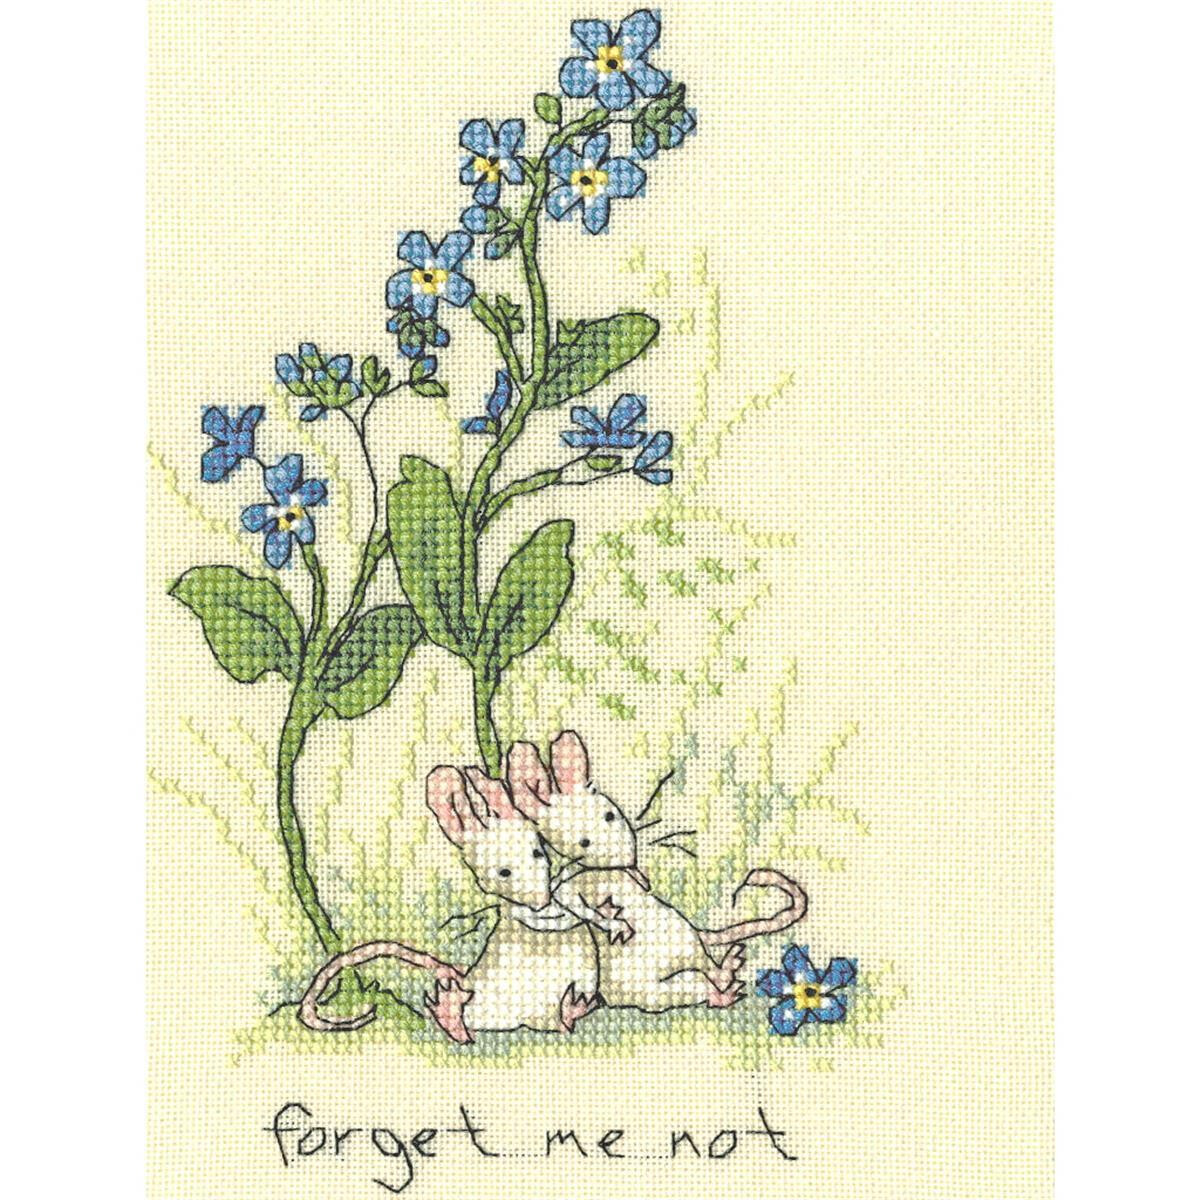 A cross stitch embroidery or embroidery pack from Bothy...